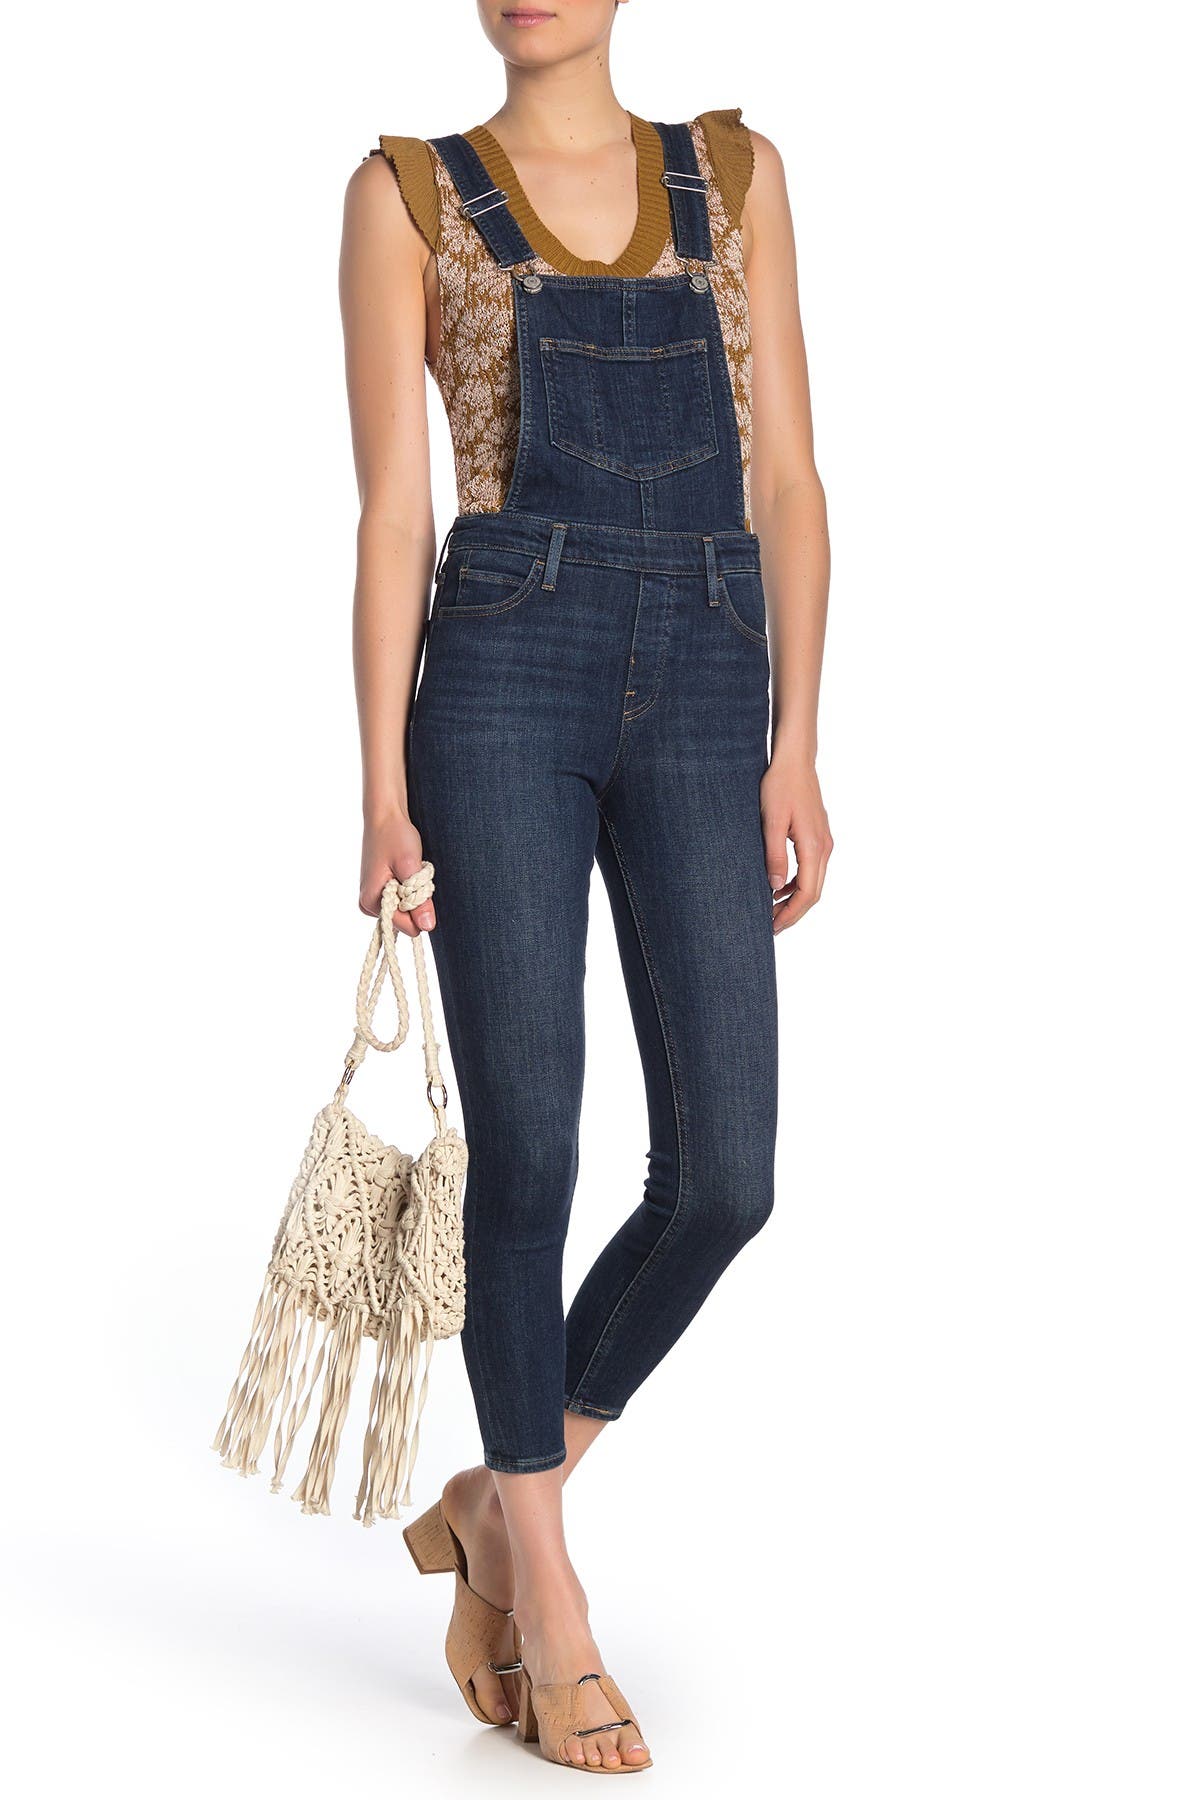 levi's skinny overalls over and out